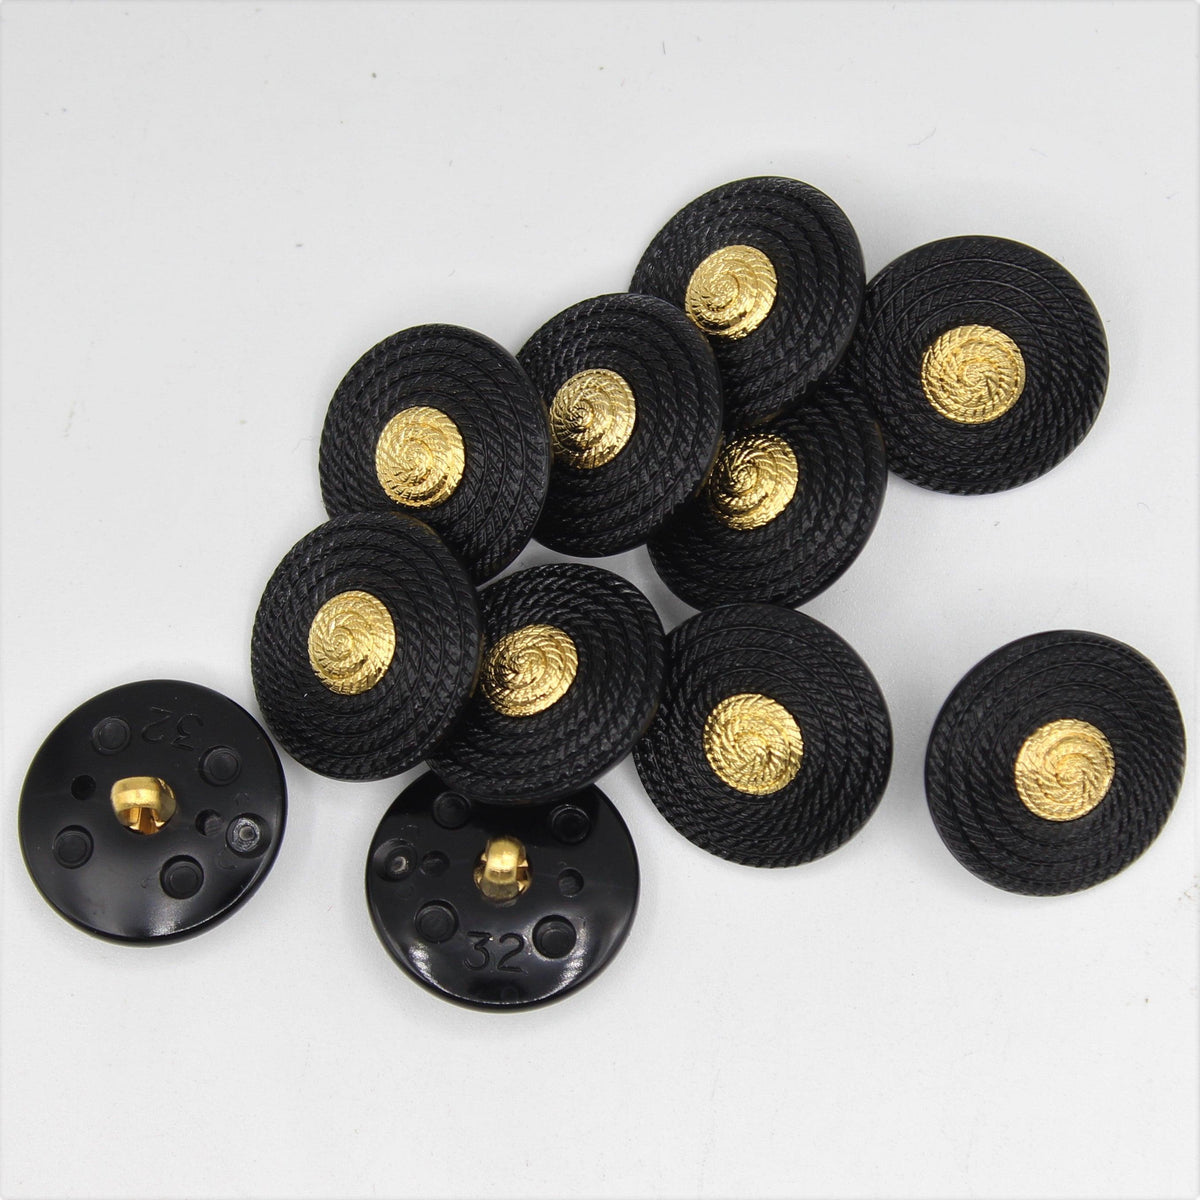 Black Shank Button Covered in Spiral Rope with Gold 11mm - ACCESSOIRES LEDUC